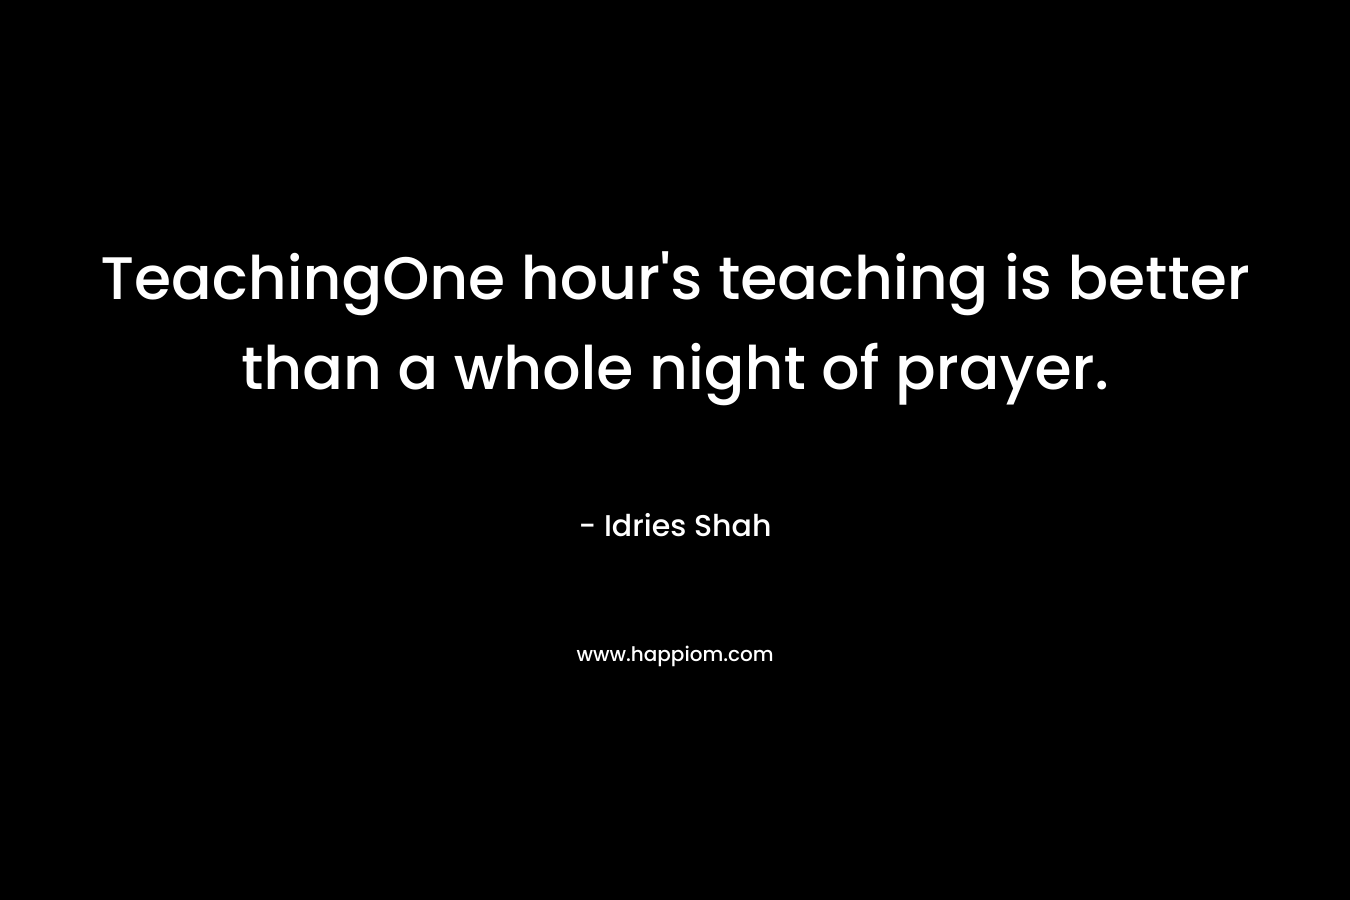 TeachingOne hour's teaching is better than a whole night of prayer.